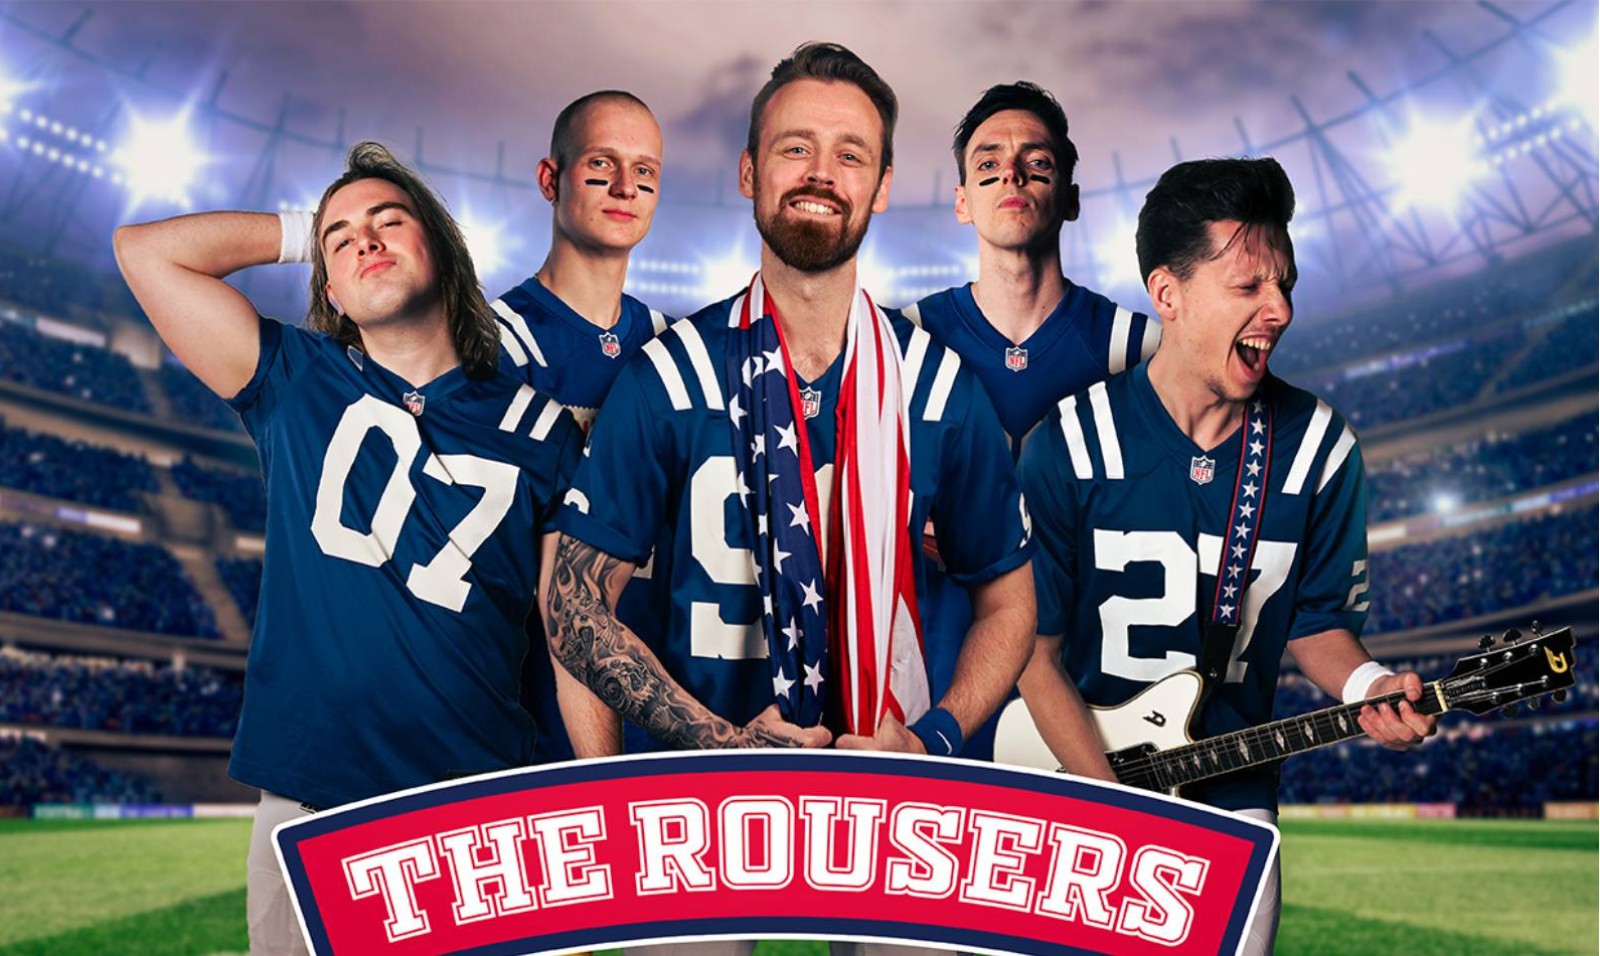 The Rousers